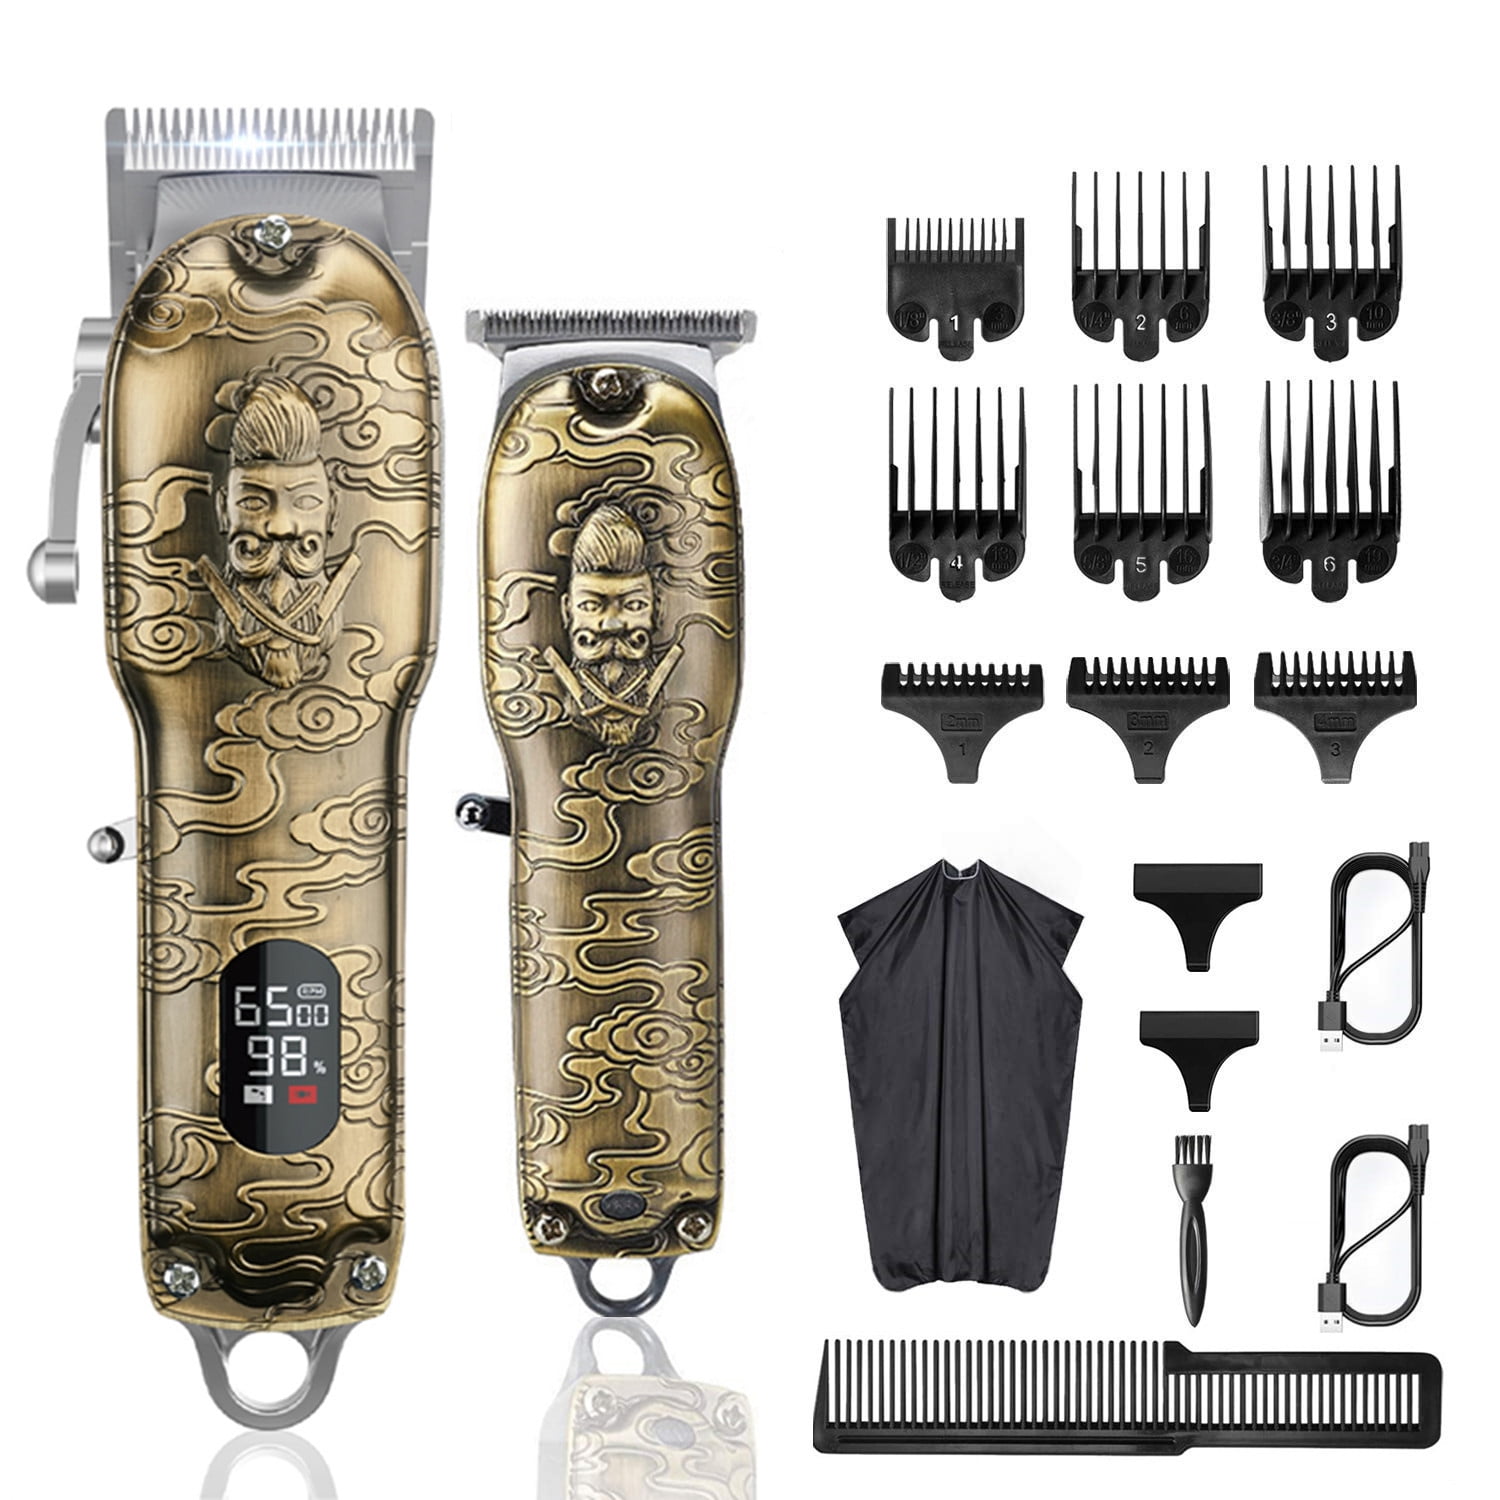 RESUXI Hair Clippers for Men,Professional Hair Trimmer Set Cordless ...